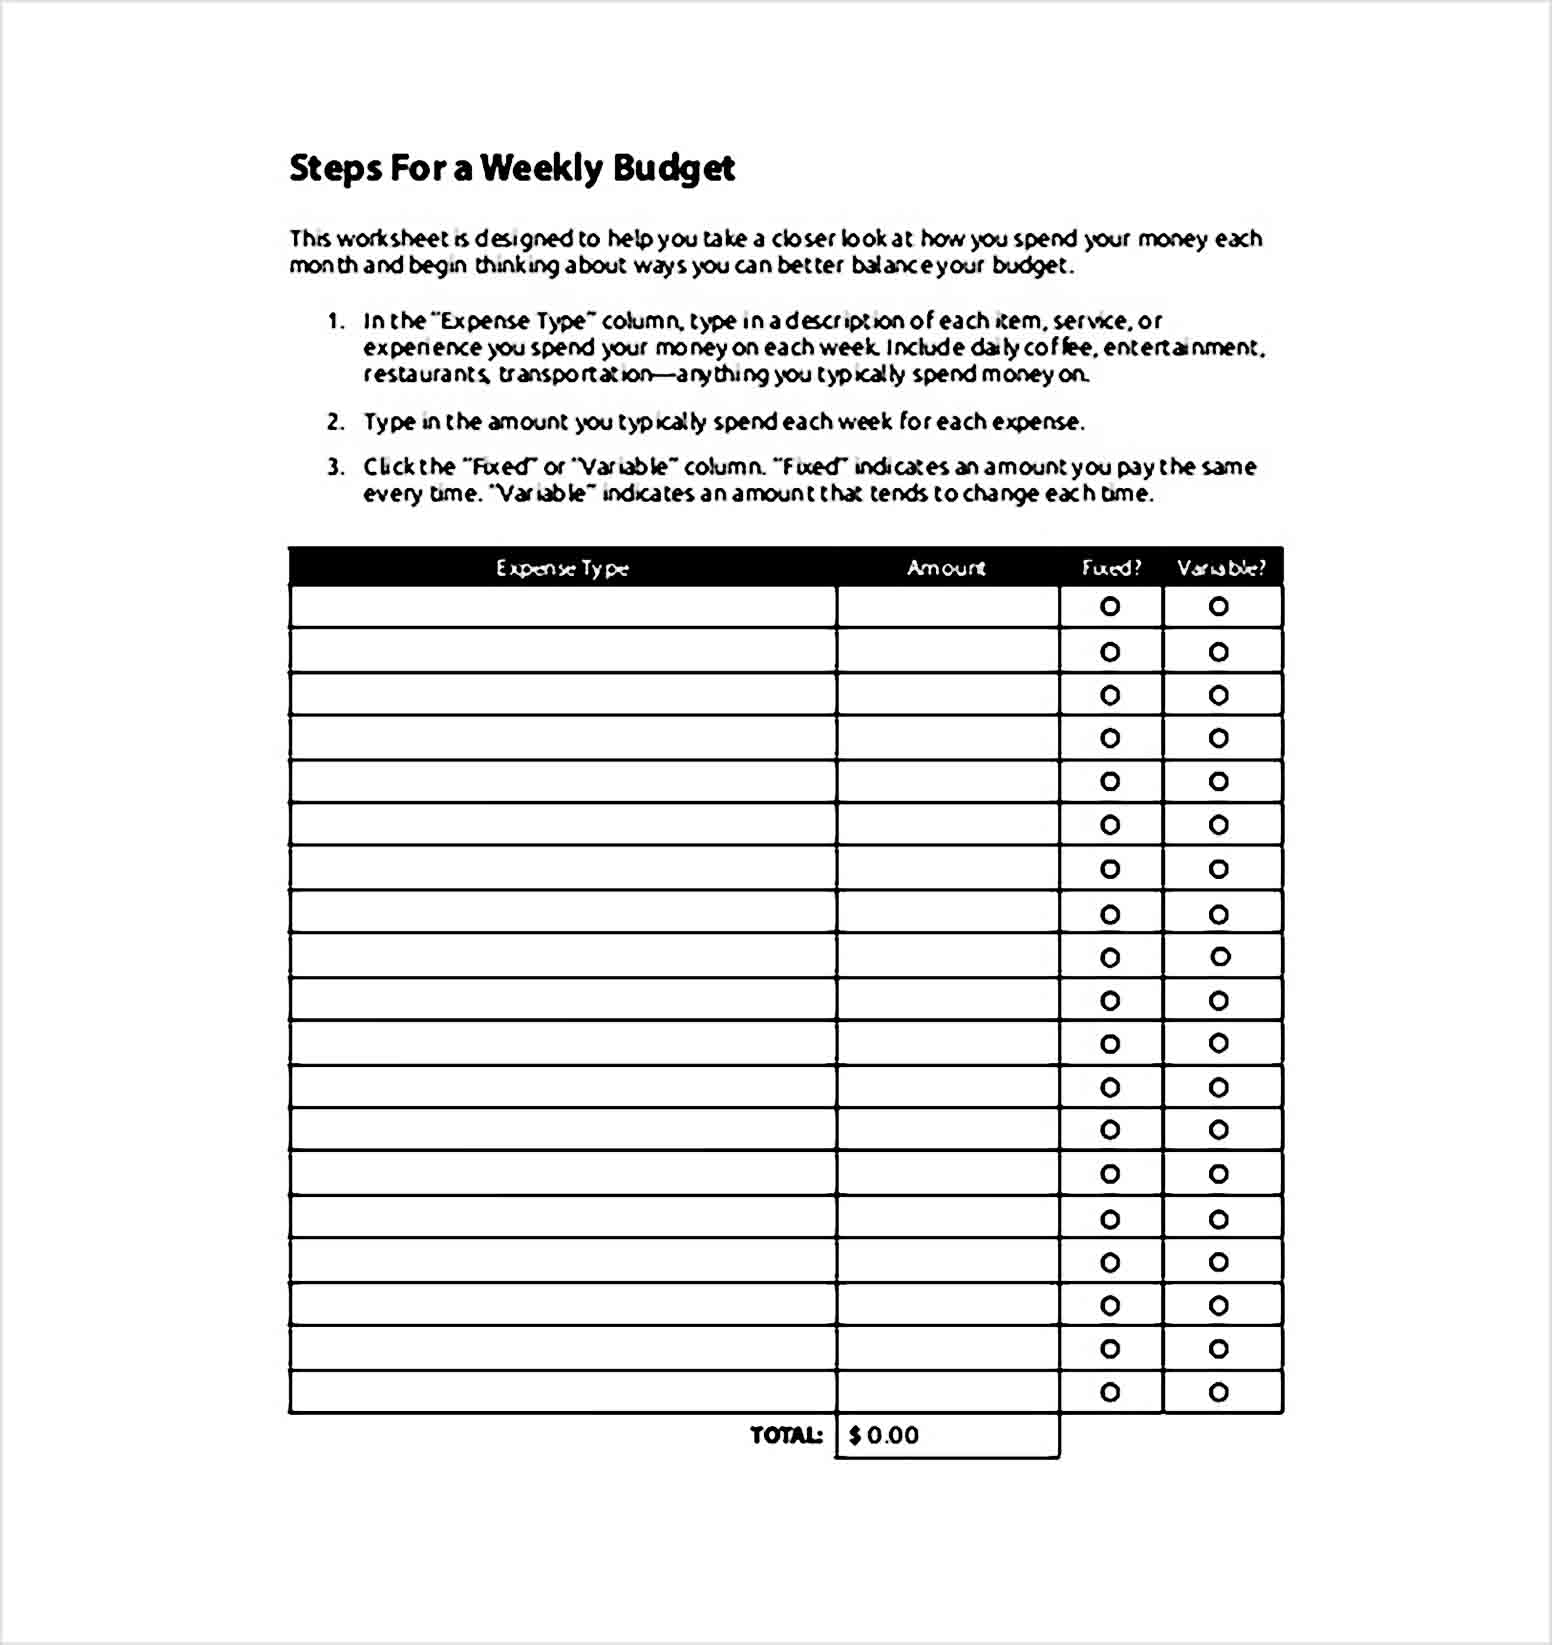 Steps For a Weekly Budget PDF Download 1